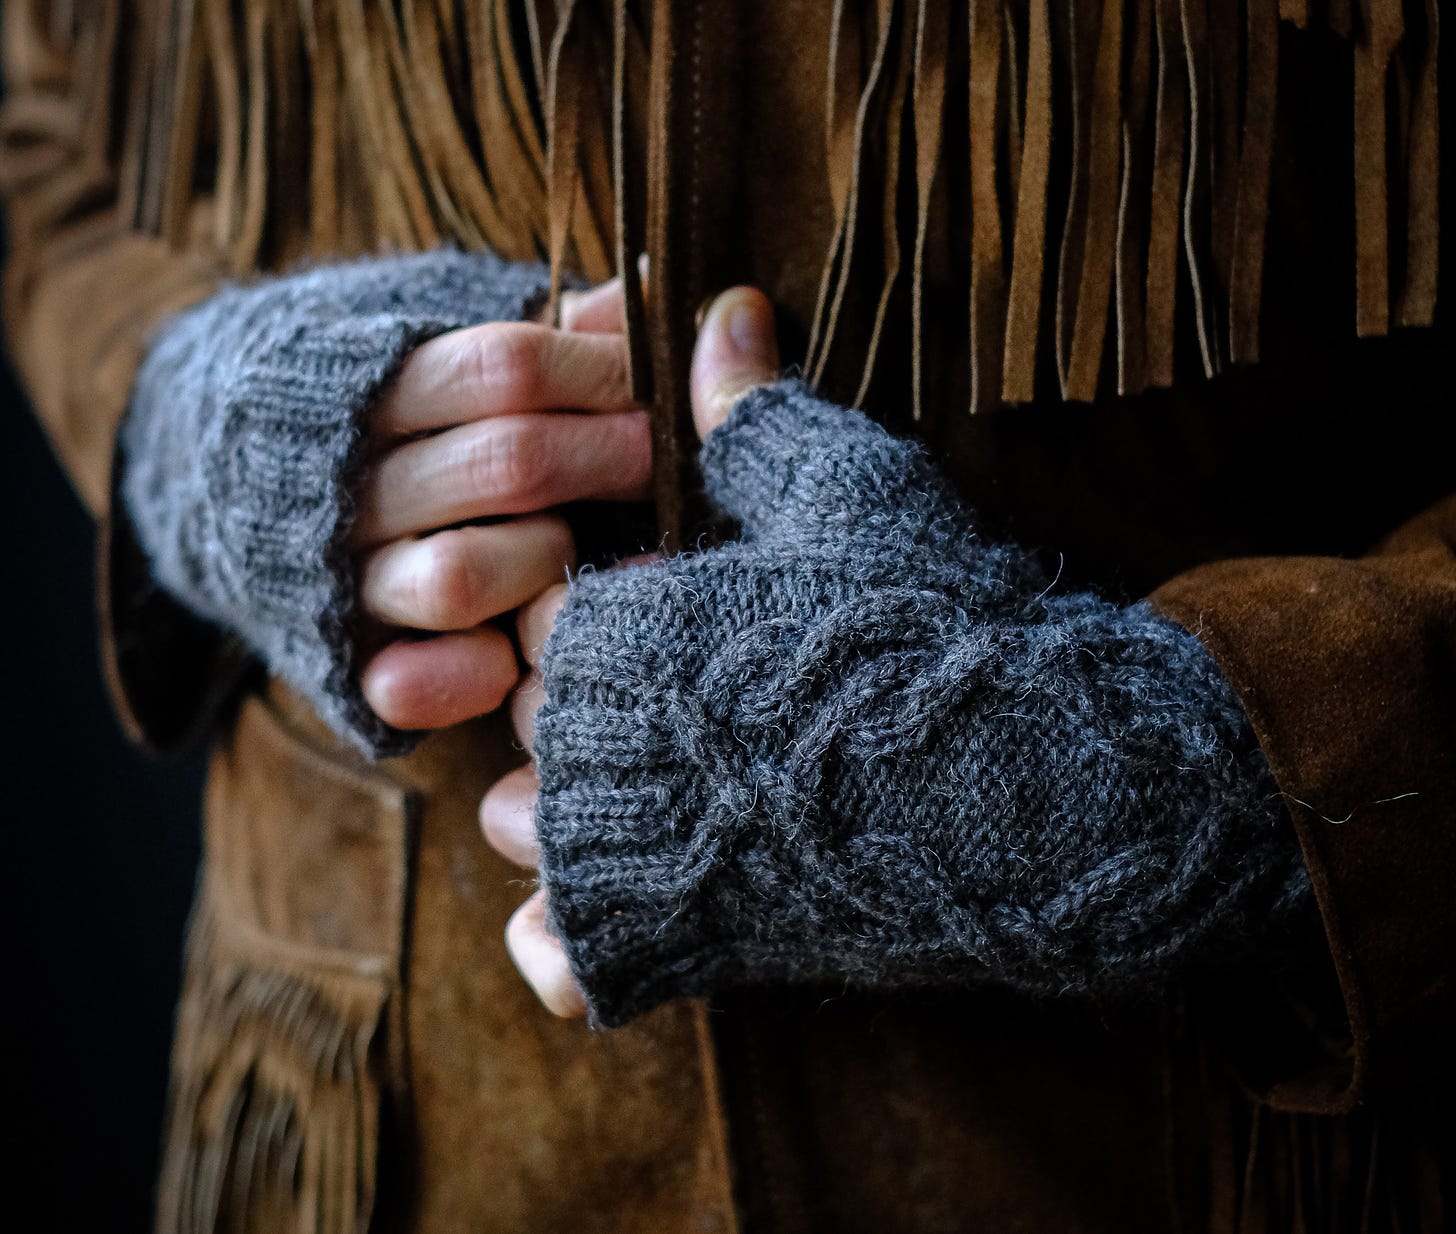 Two hands, wearing a pair of handknitted, cabled fingerless mittens close the final clasp of a suede jacket. Fringe hanging from the breast of the jacket tickling and caressing the fingers of our subject as the cool, evening light pours in from the left. The wool is sticky, textured and rough. Fisherman wool. Woodworker. Wool made for stability and security. In the distance, the smell of pine lingers in the damp air — carried by the fog rolling in off the mountains. Foxes feet silently running through the undergrowth. The soft cry of an elk echoing. 